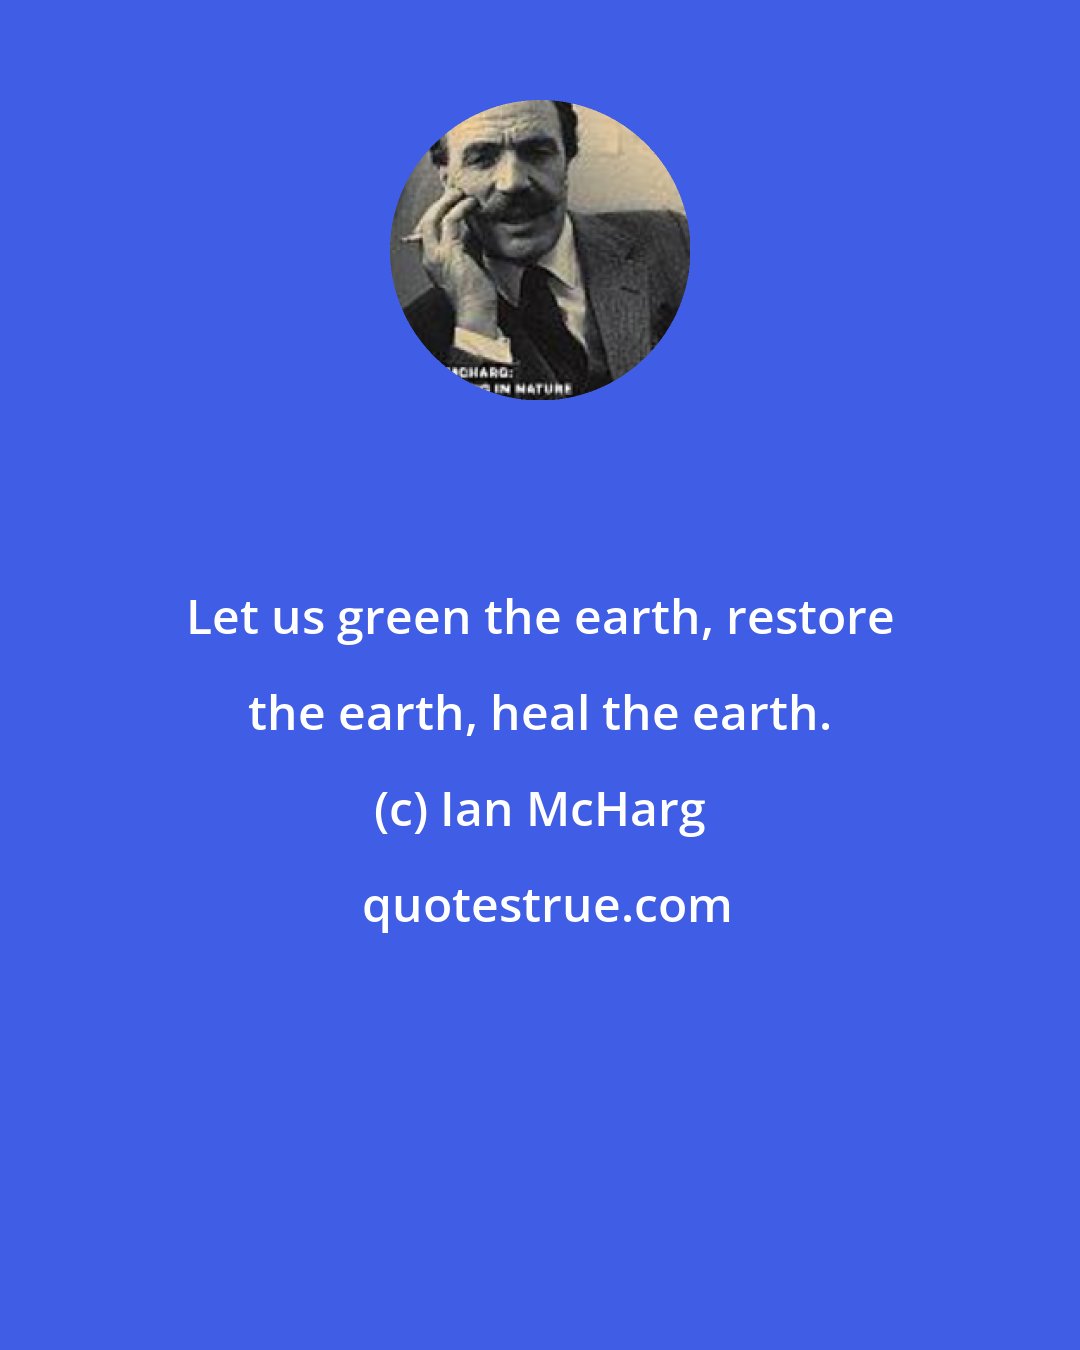 Ian McHarg: Let us green the earth, restore the earth, heal the earth.